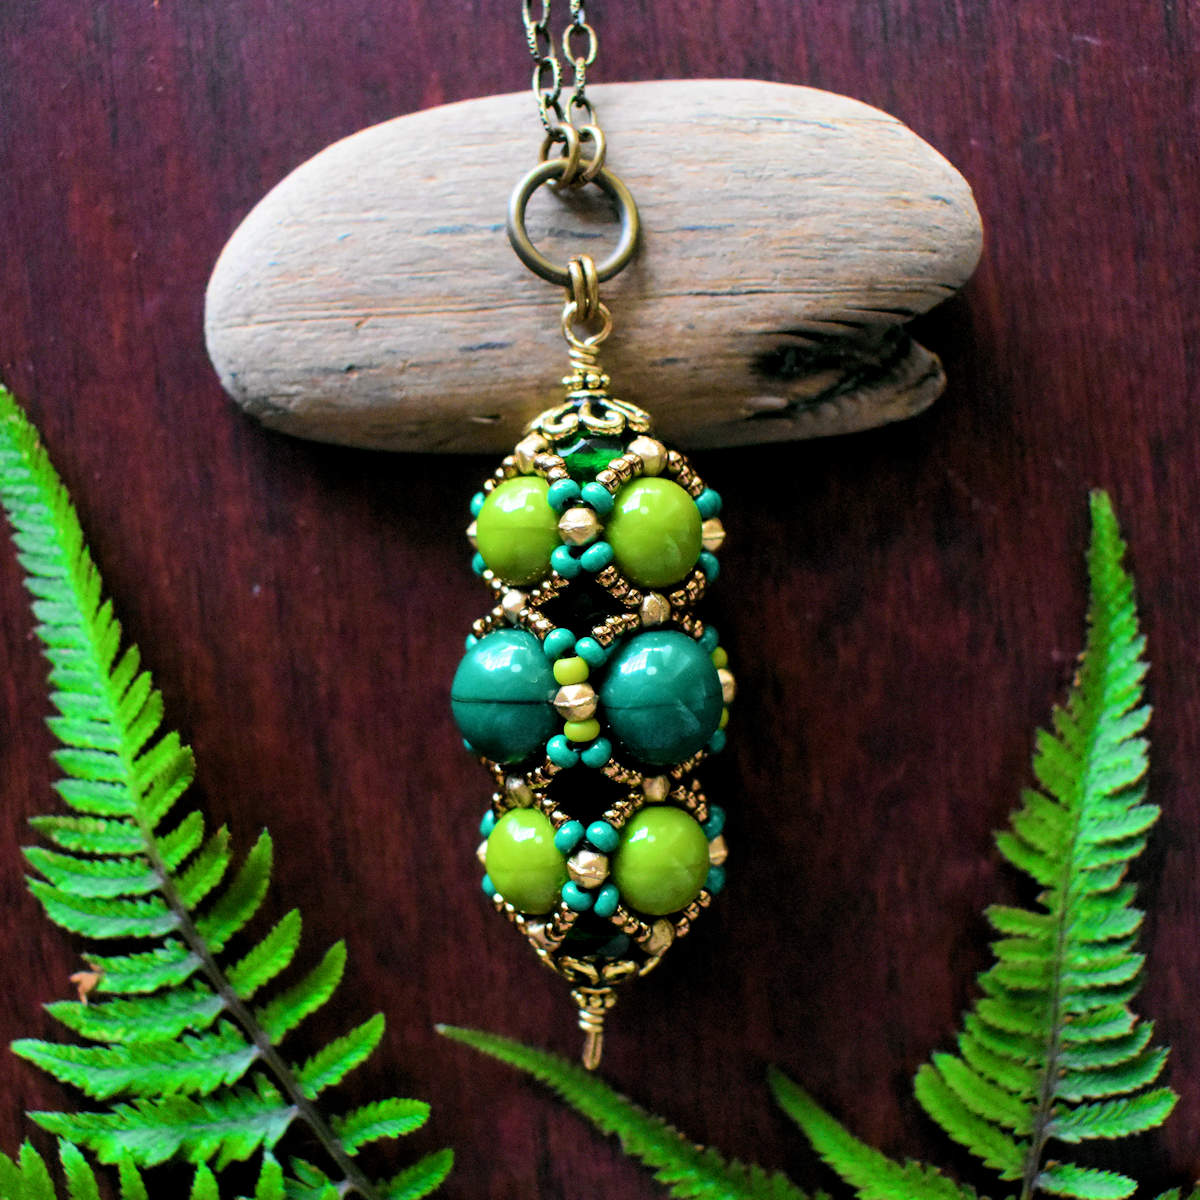 A green pendant with brass chain is draped across a piece of driftwood, with ferns laid out below it. The pendant is dark green in the center and avocado green on top and bottom. Both layers are overlaid with a netting of gold and green seed beads.